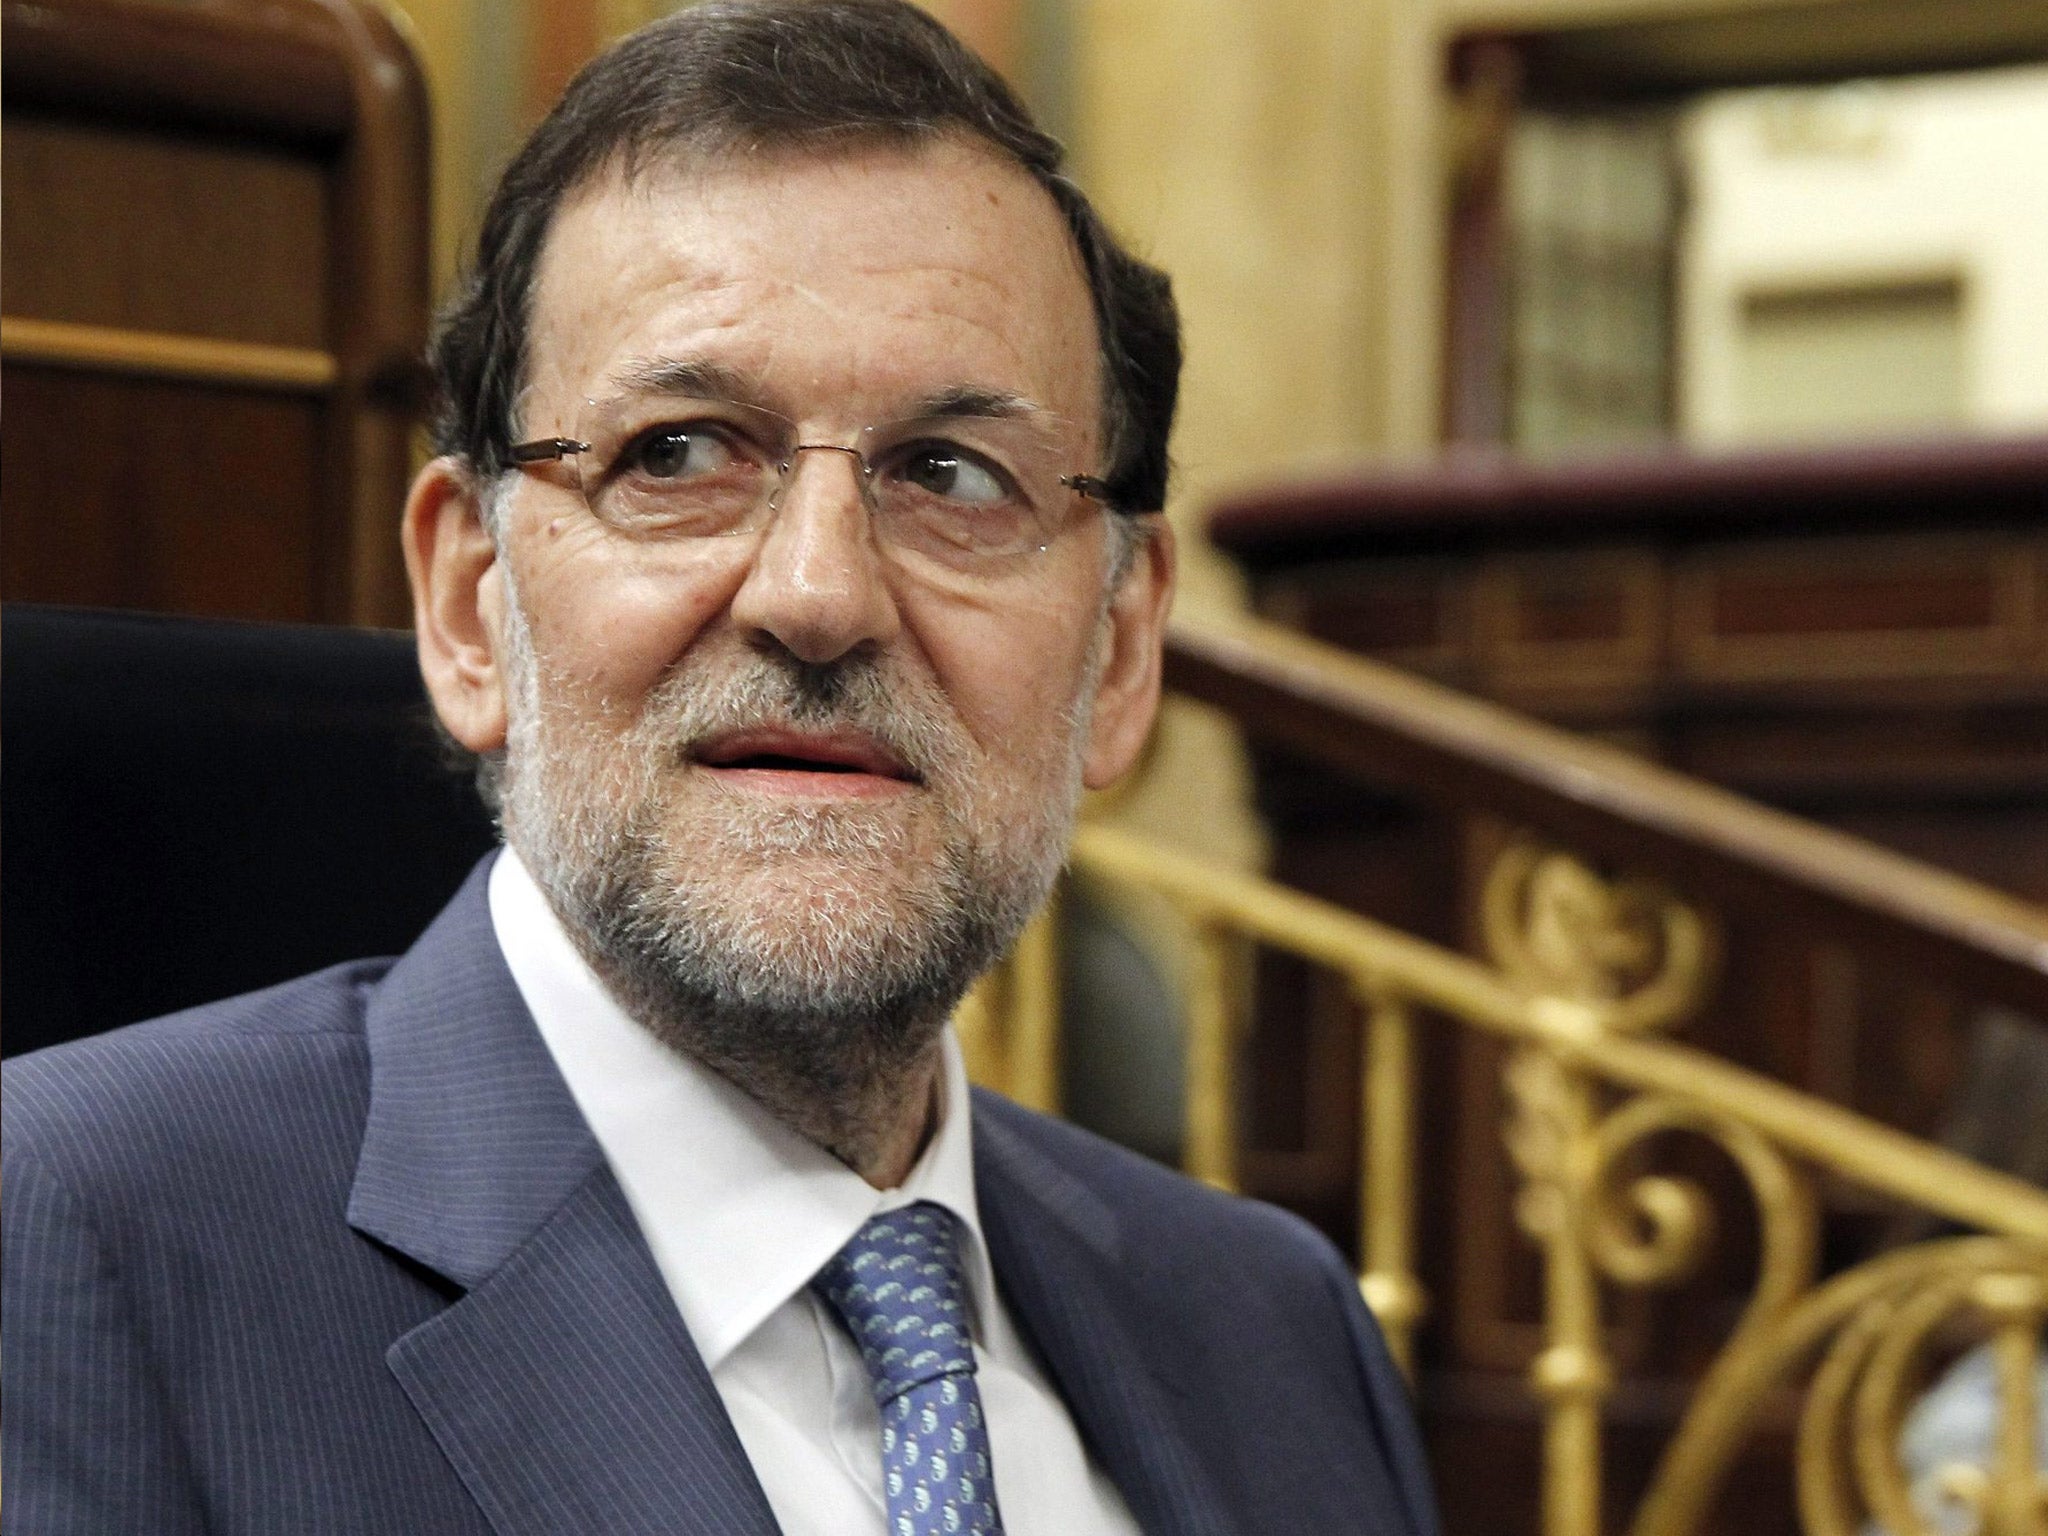 El Mundo yesterday printed a picture of a ledger purporting to show Mariano Rajoy received €42,000 in 1997